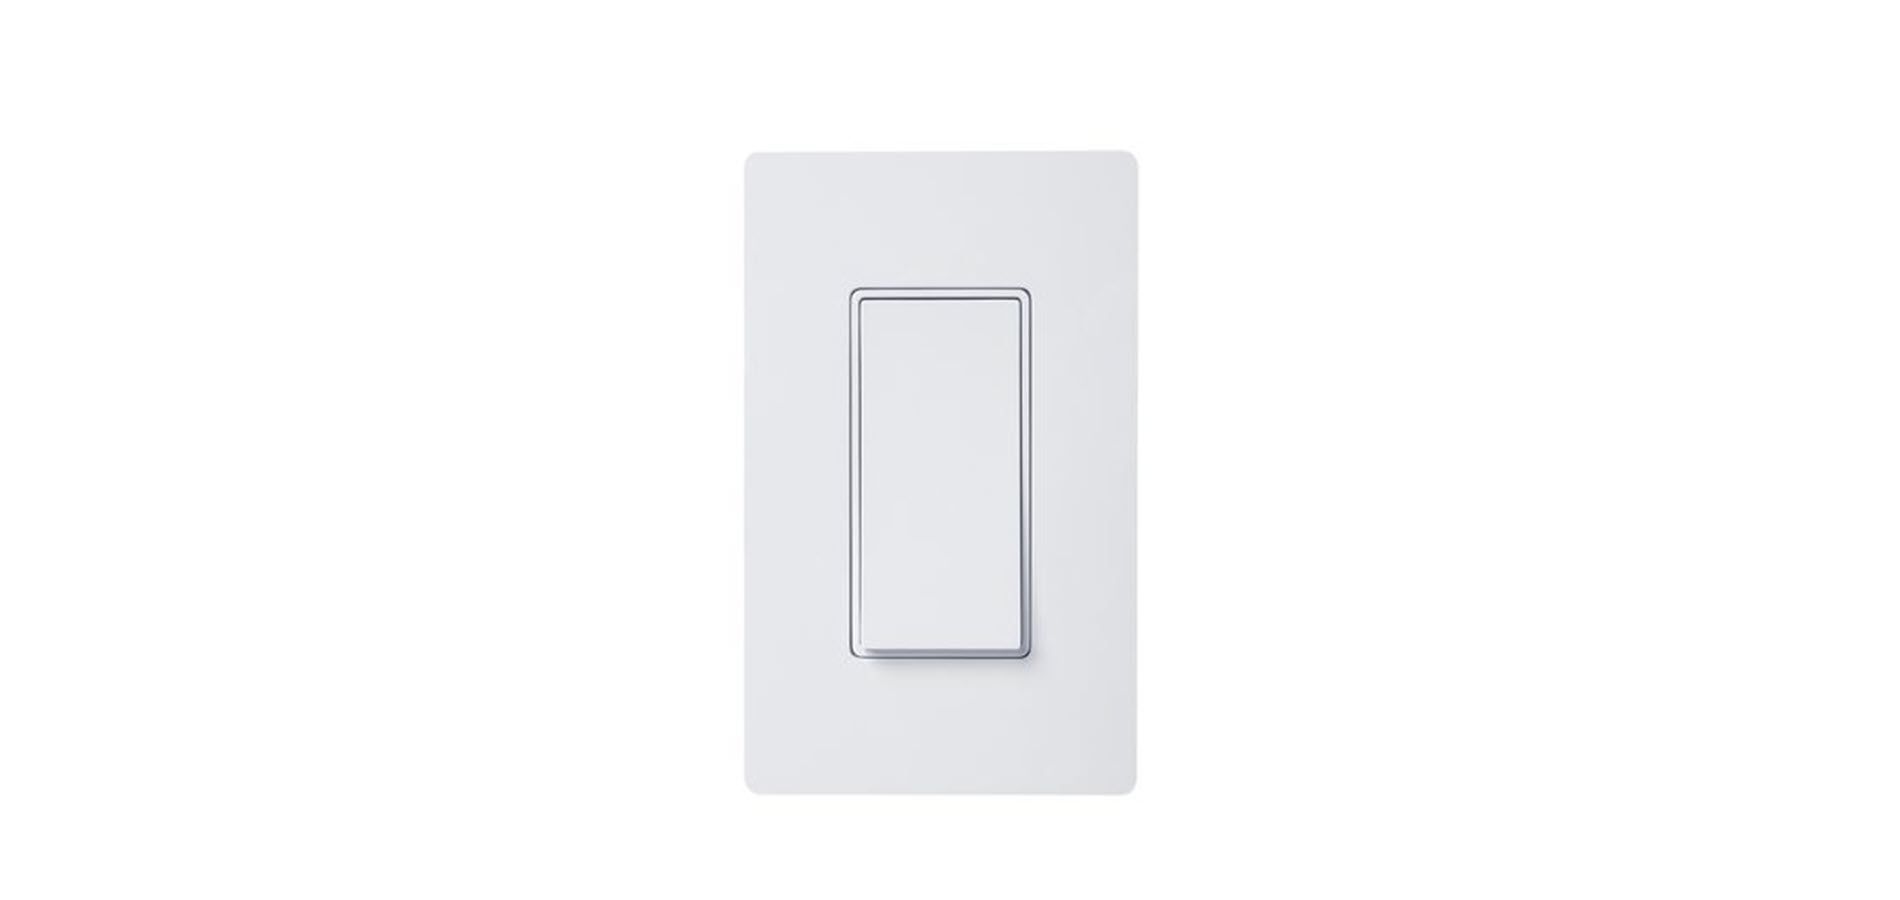 A white paddle-style light switch.